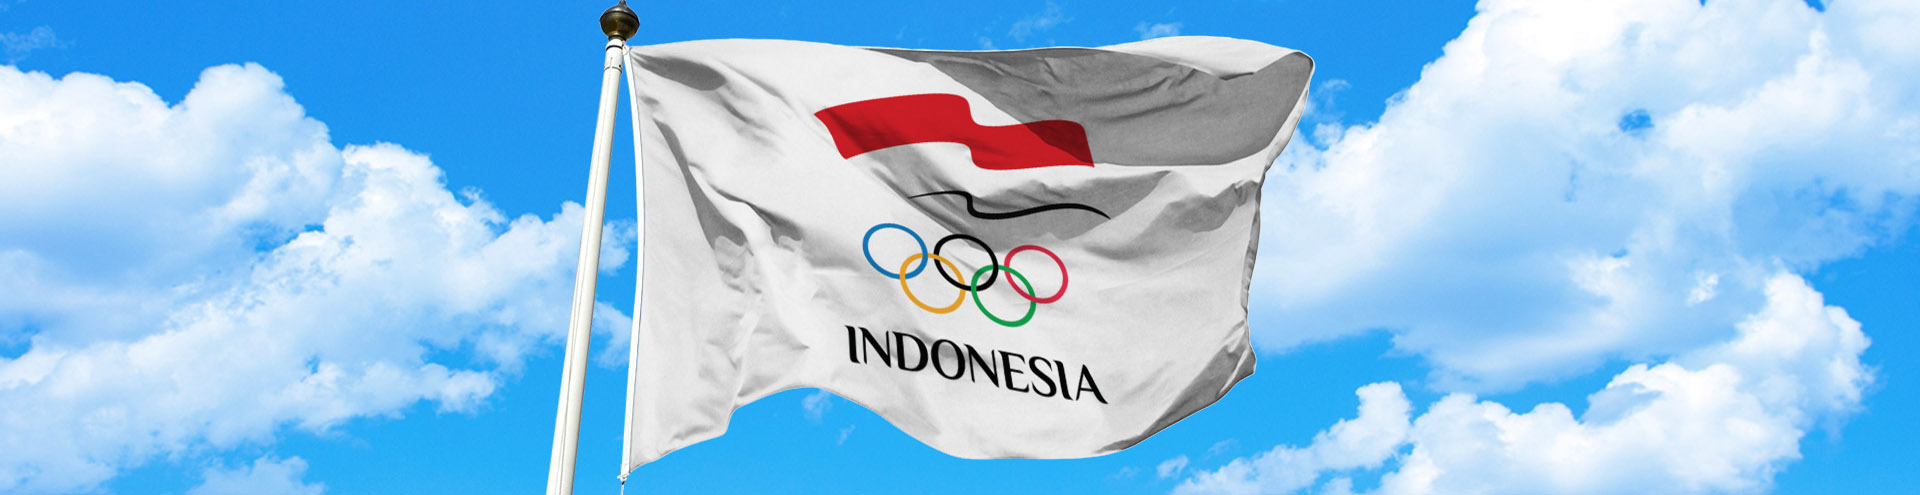 Indonesia Olympic Commitee - SEA Games Budget Secured